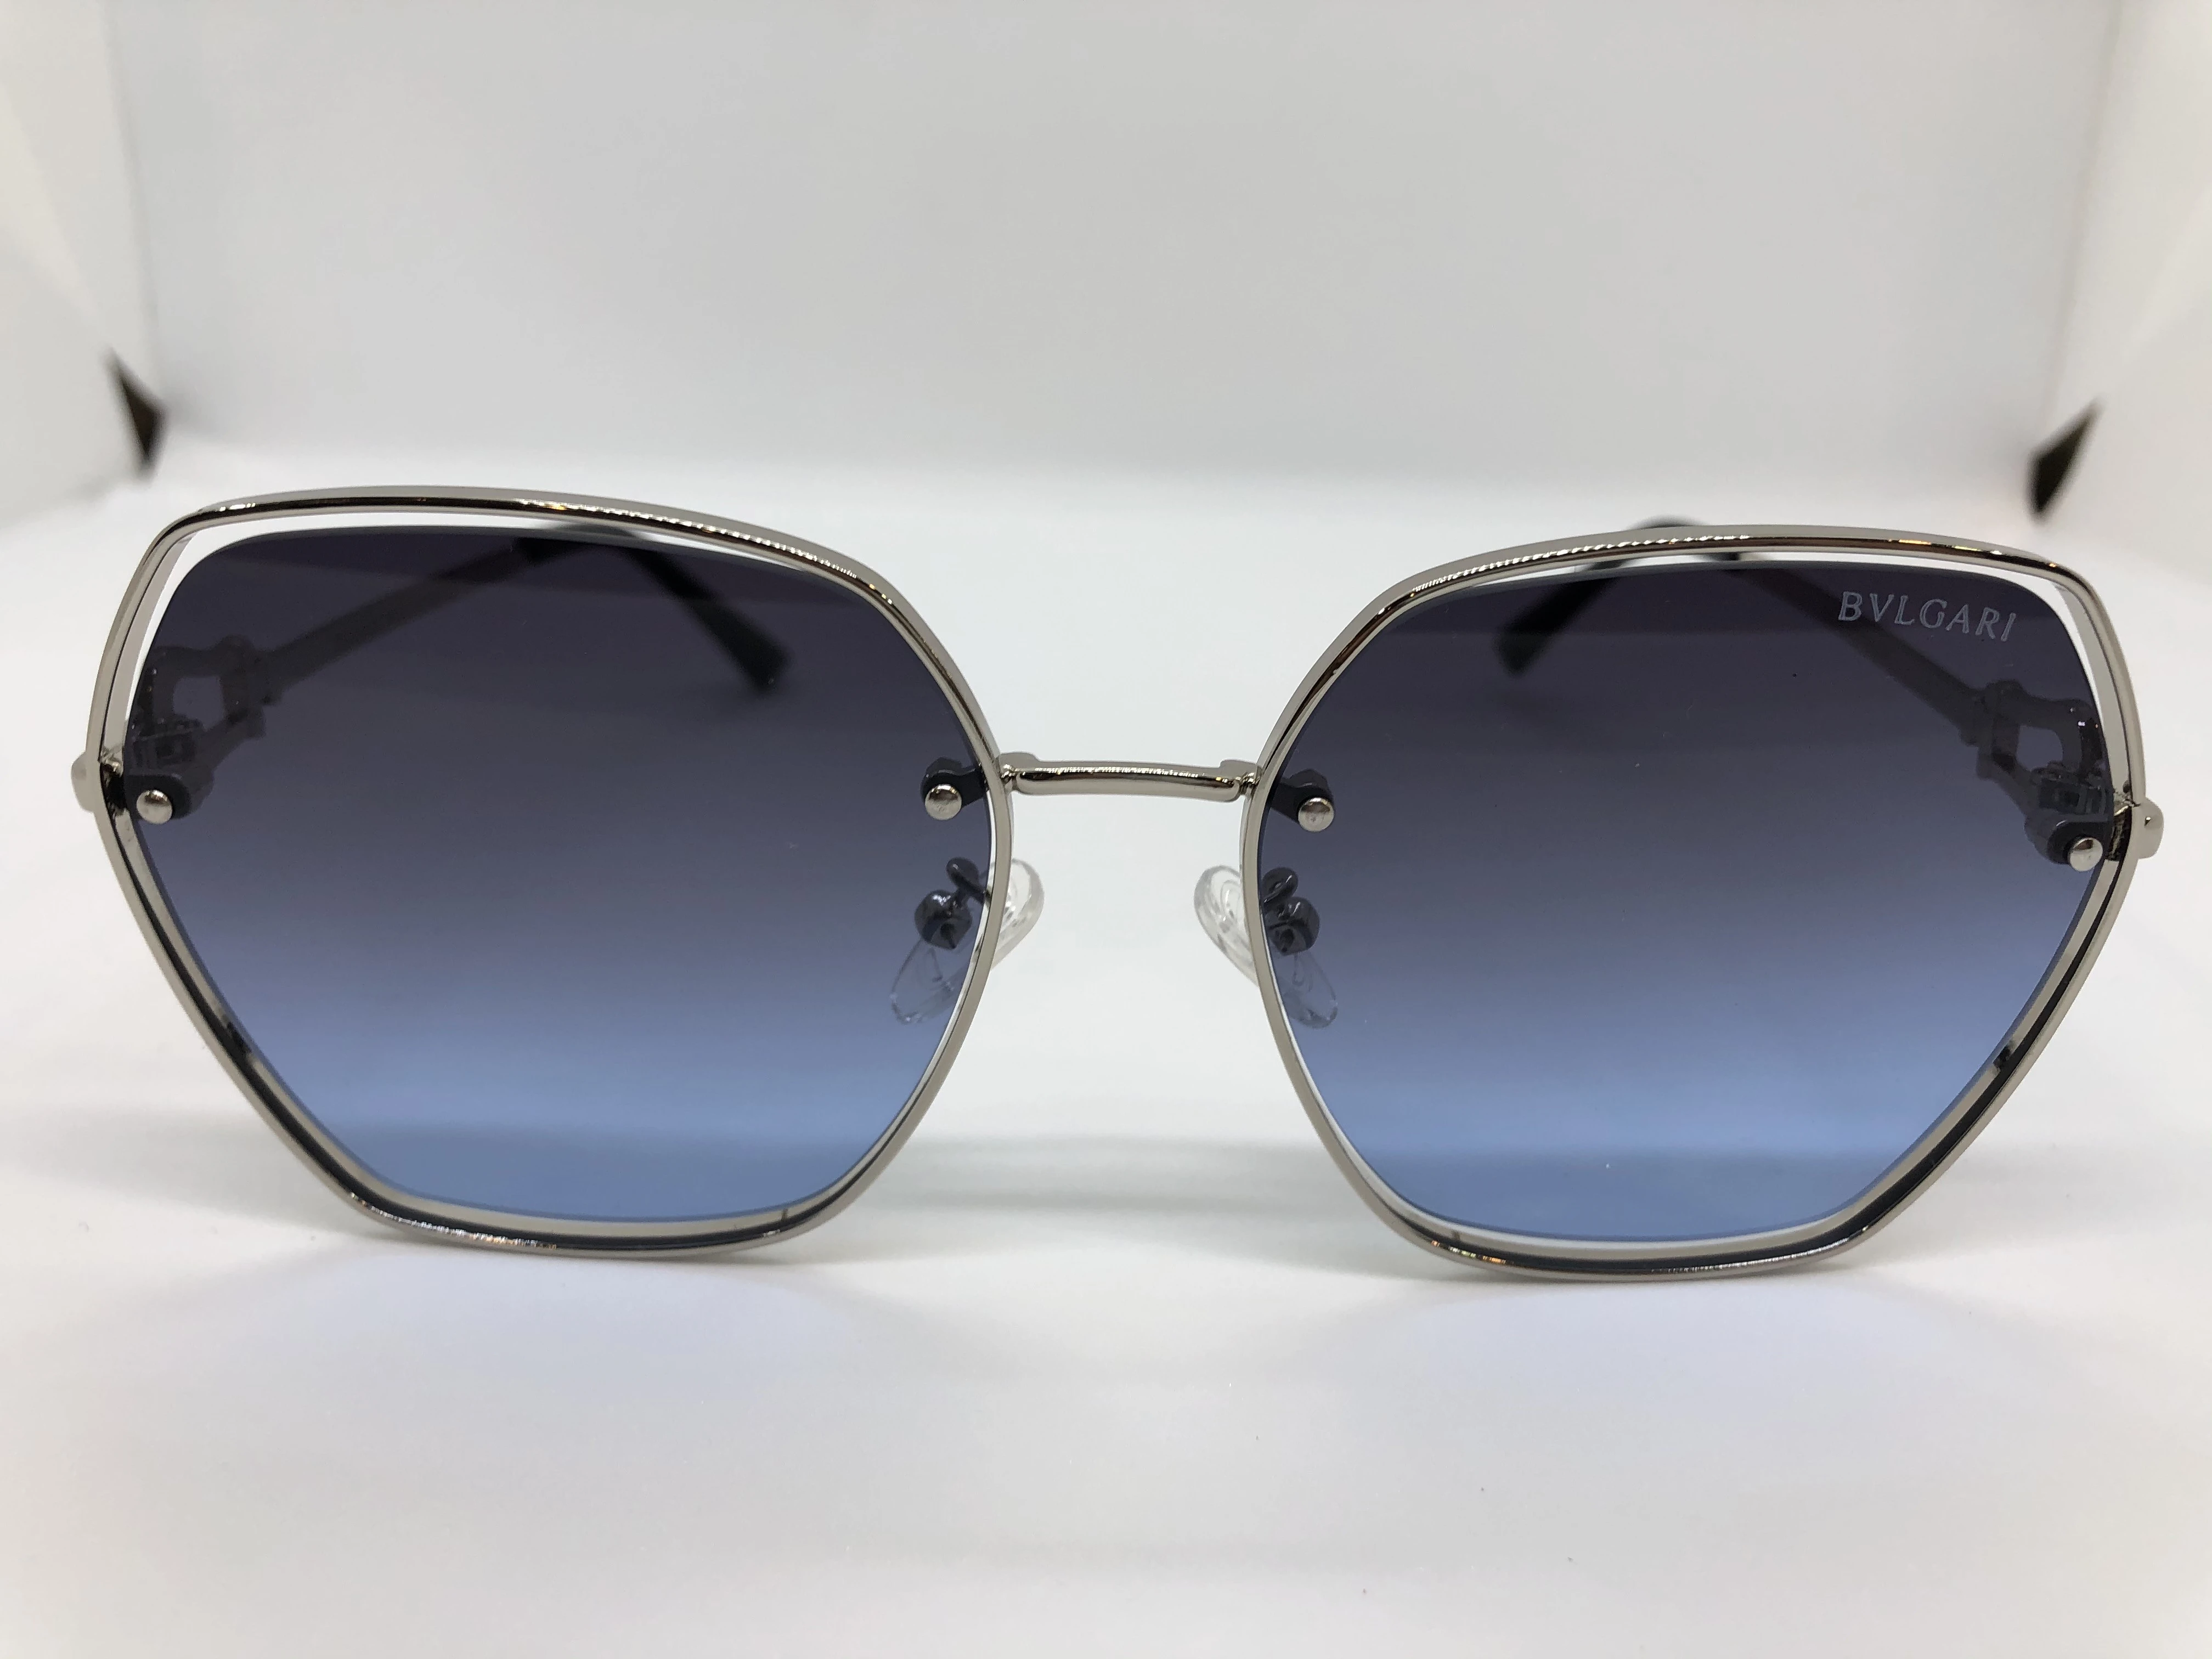 Sunglasses - from Bvlgari - silver metal frame - blue tinted lenses - silver metal arm - silver brand logo - for women